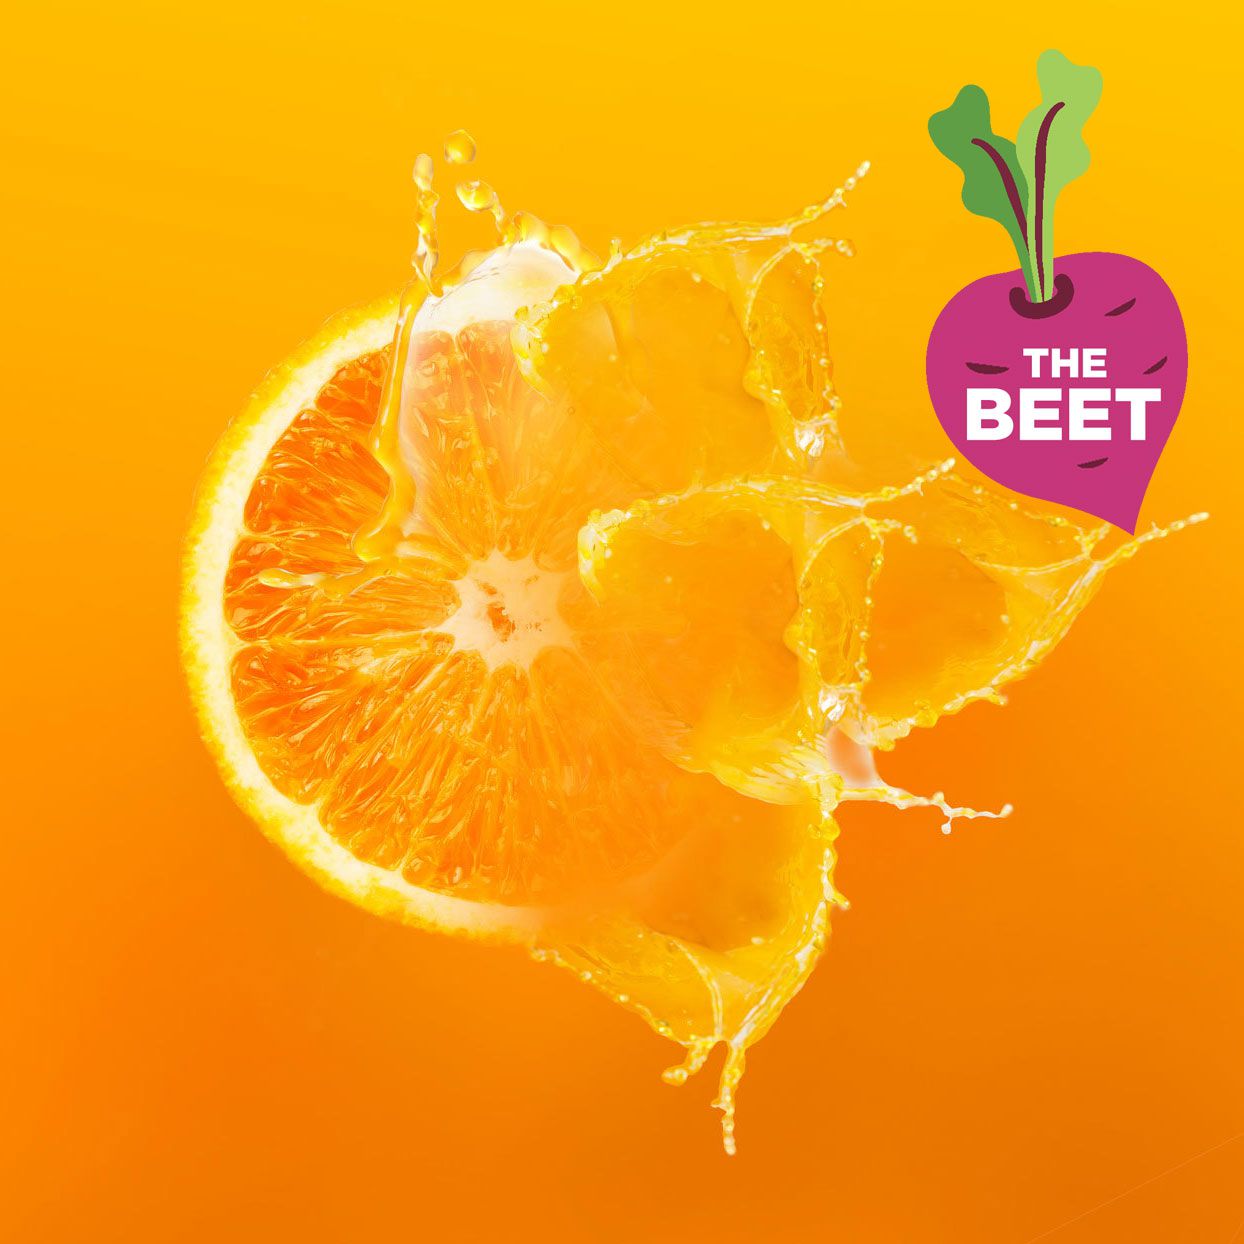 slice of orange with EatingWell's "The Beet" logo